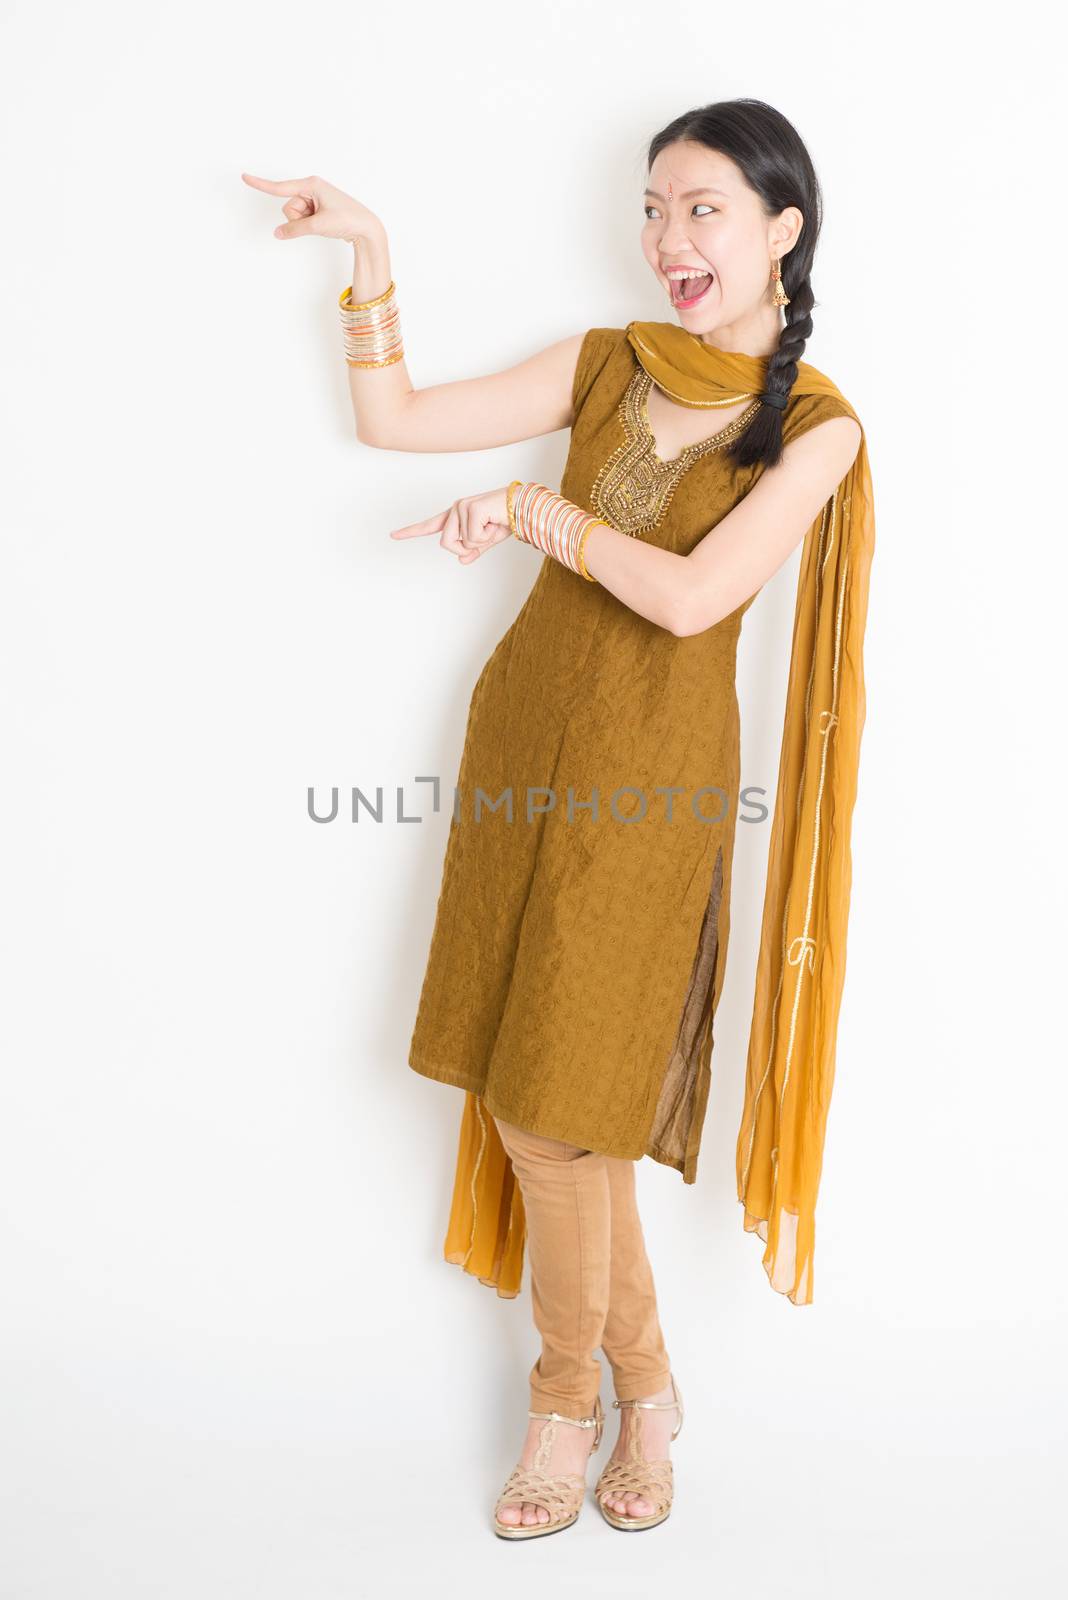 Portrait of young mixed race Indian Chinese girl in traditional punjabi dress fingers pointing at copy space, full length standing on plain white background.